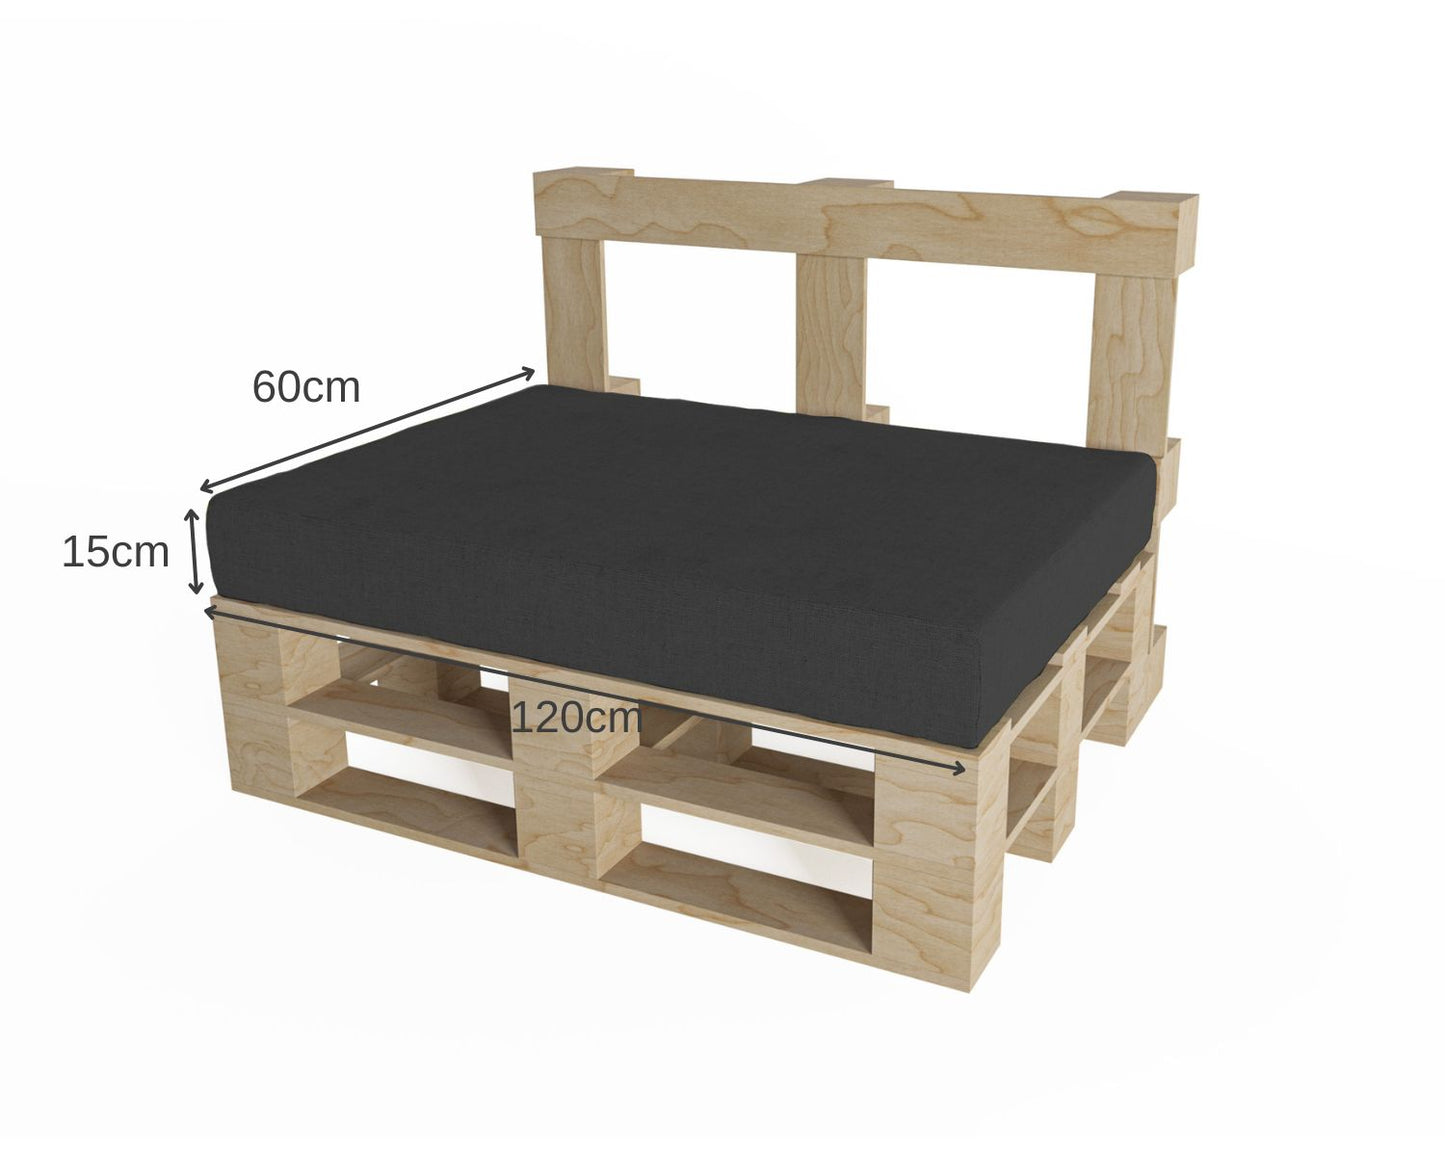 Pallet Pad Foam Flakes Pallet Cushion Pallet Upholstery Pallet Furniture Pallet Sofa Backrest Quilted Seat Cushion Removable Side Cushion Set